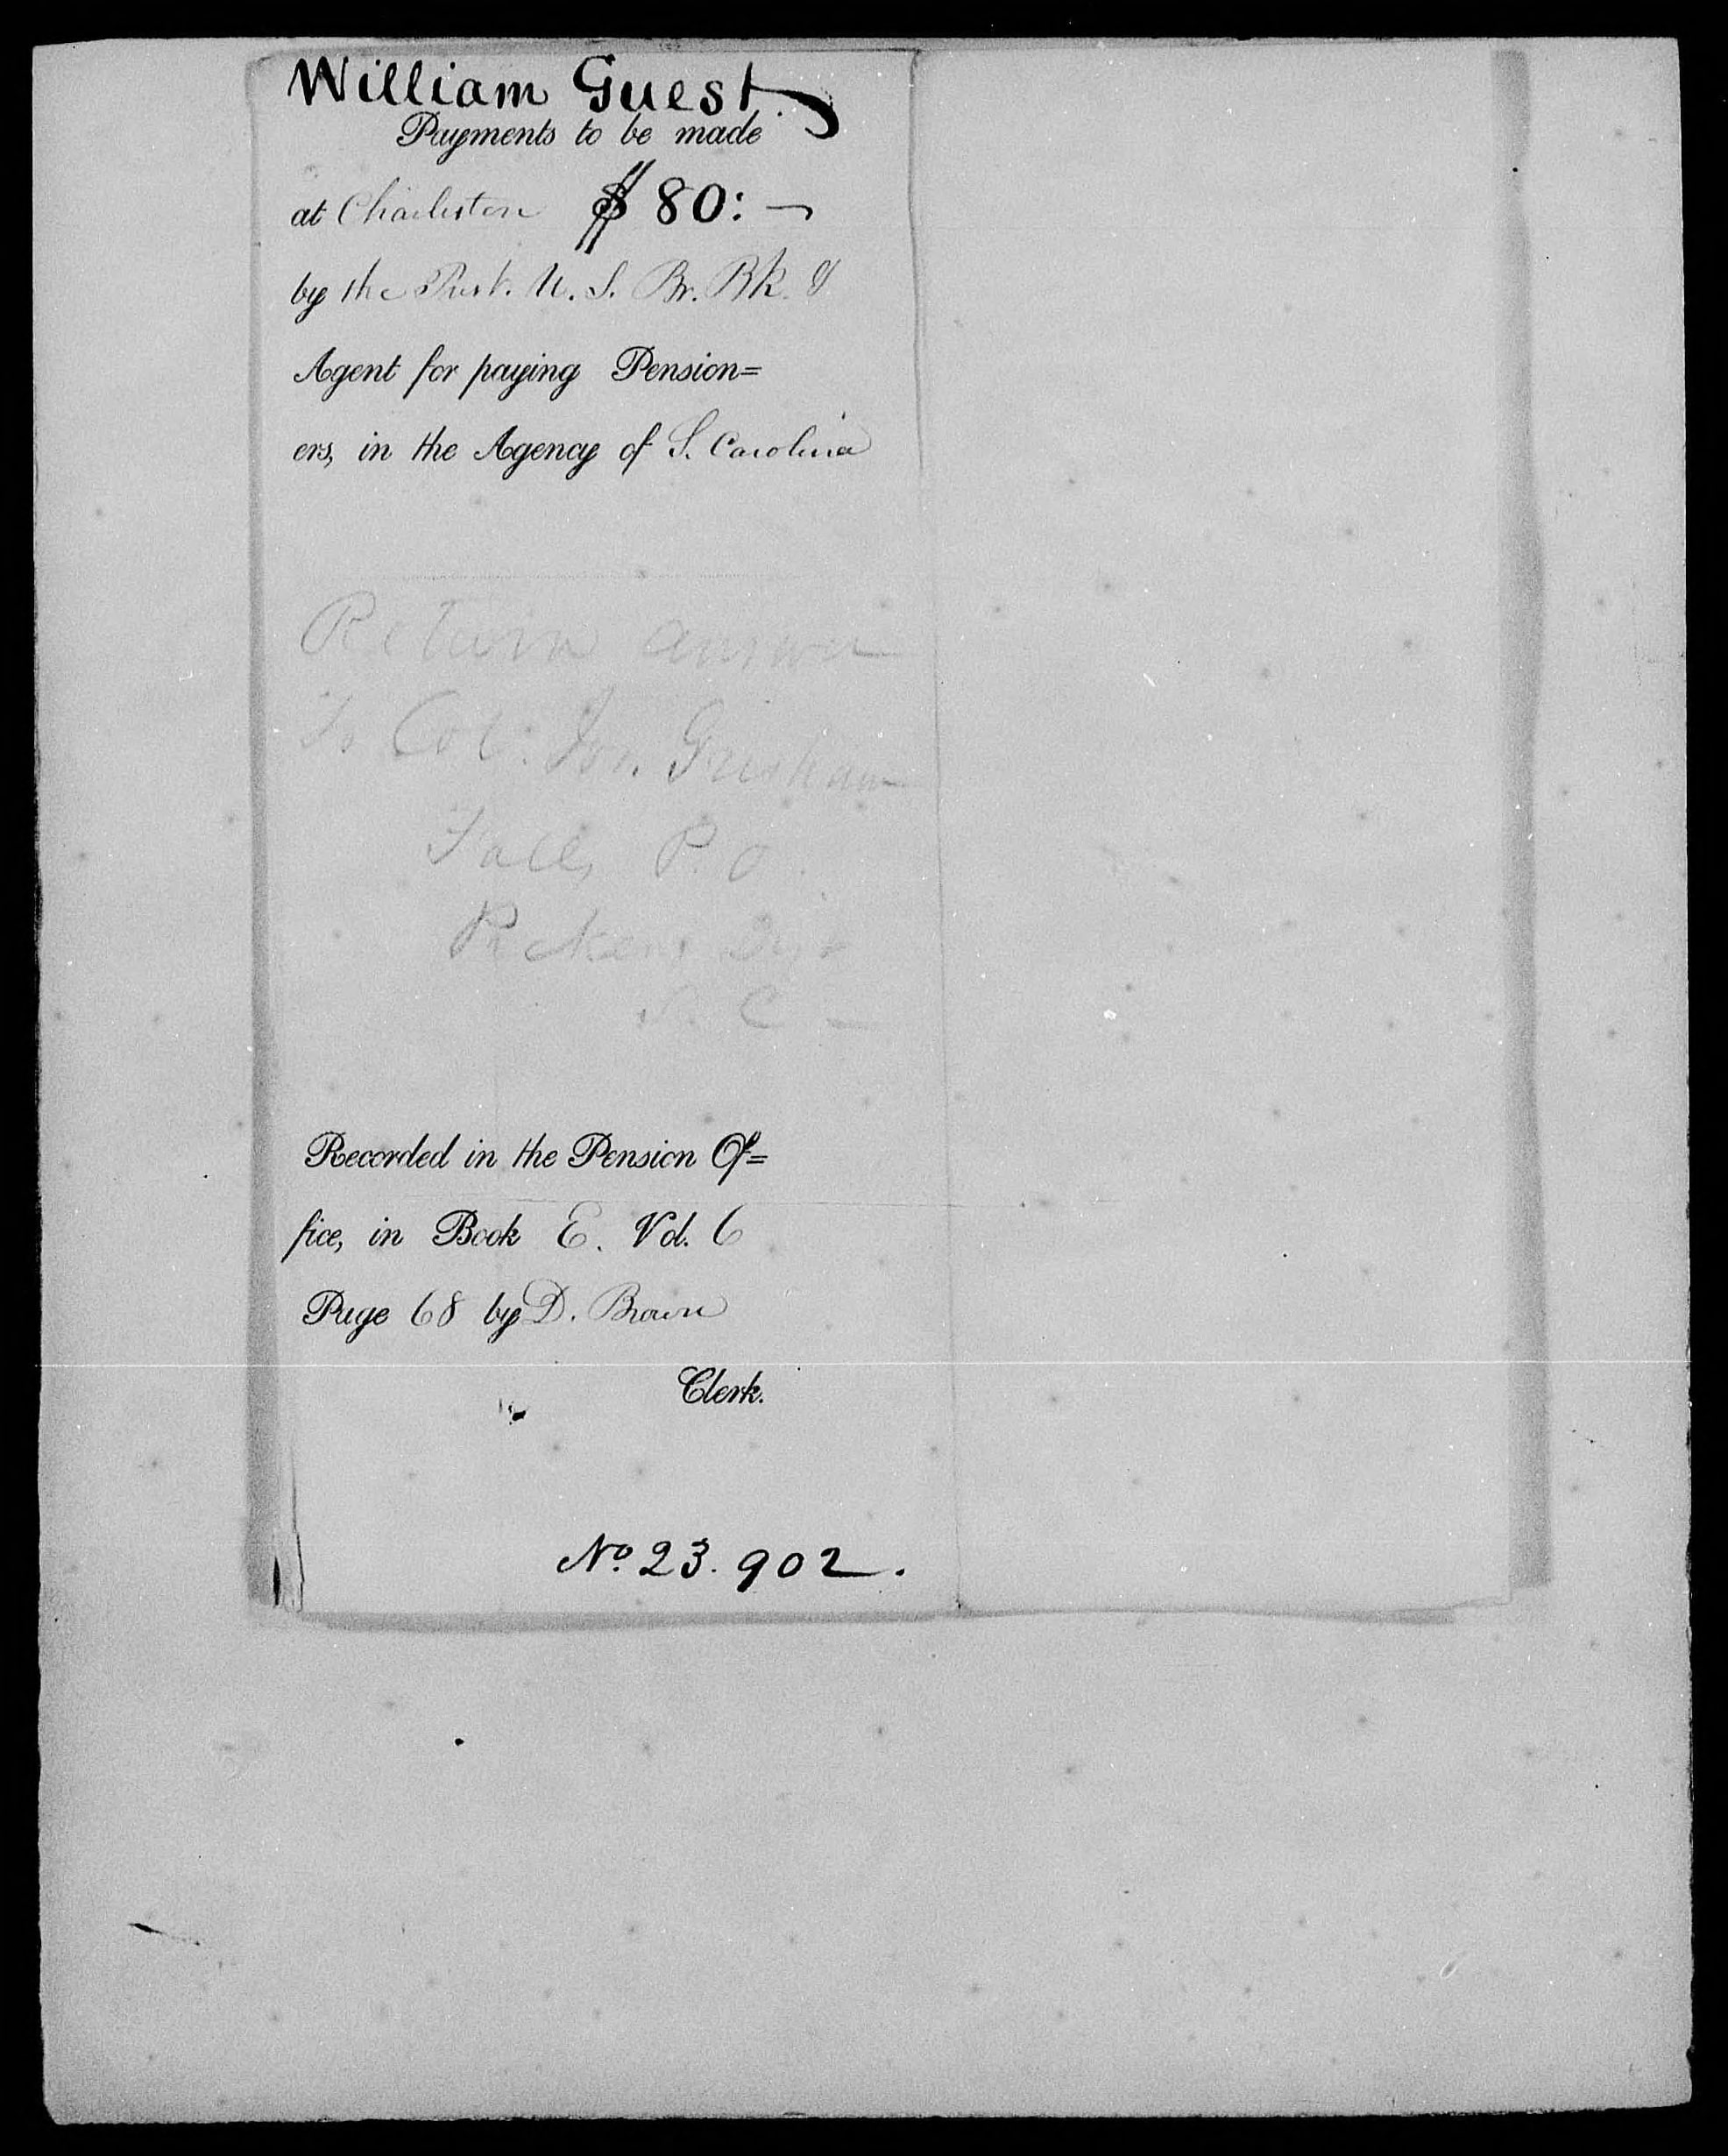 Authorization of Pension Claim from Lewis Cass for William Guest, 19 April 1834, page 2